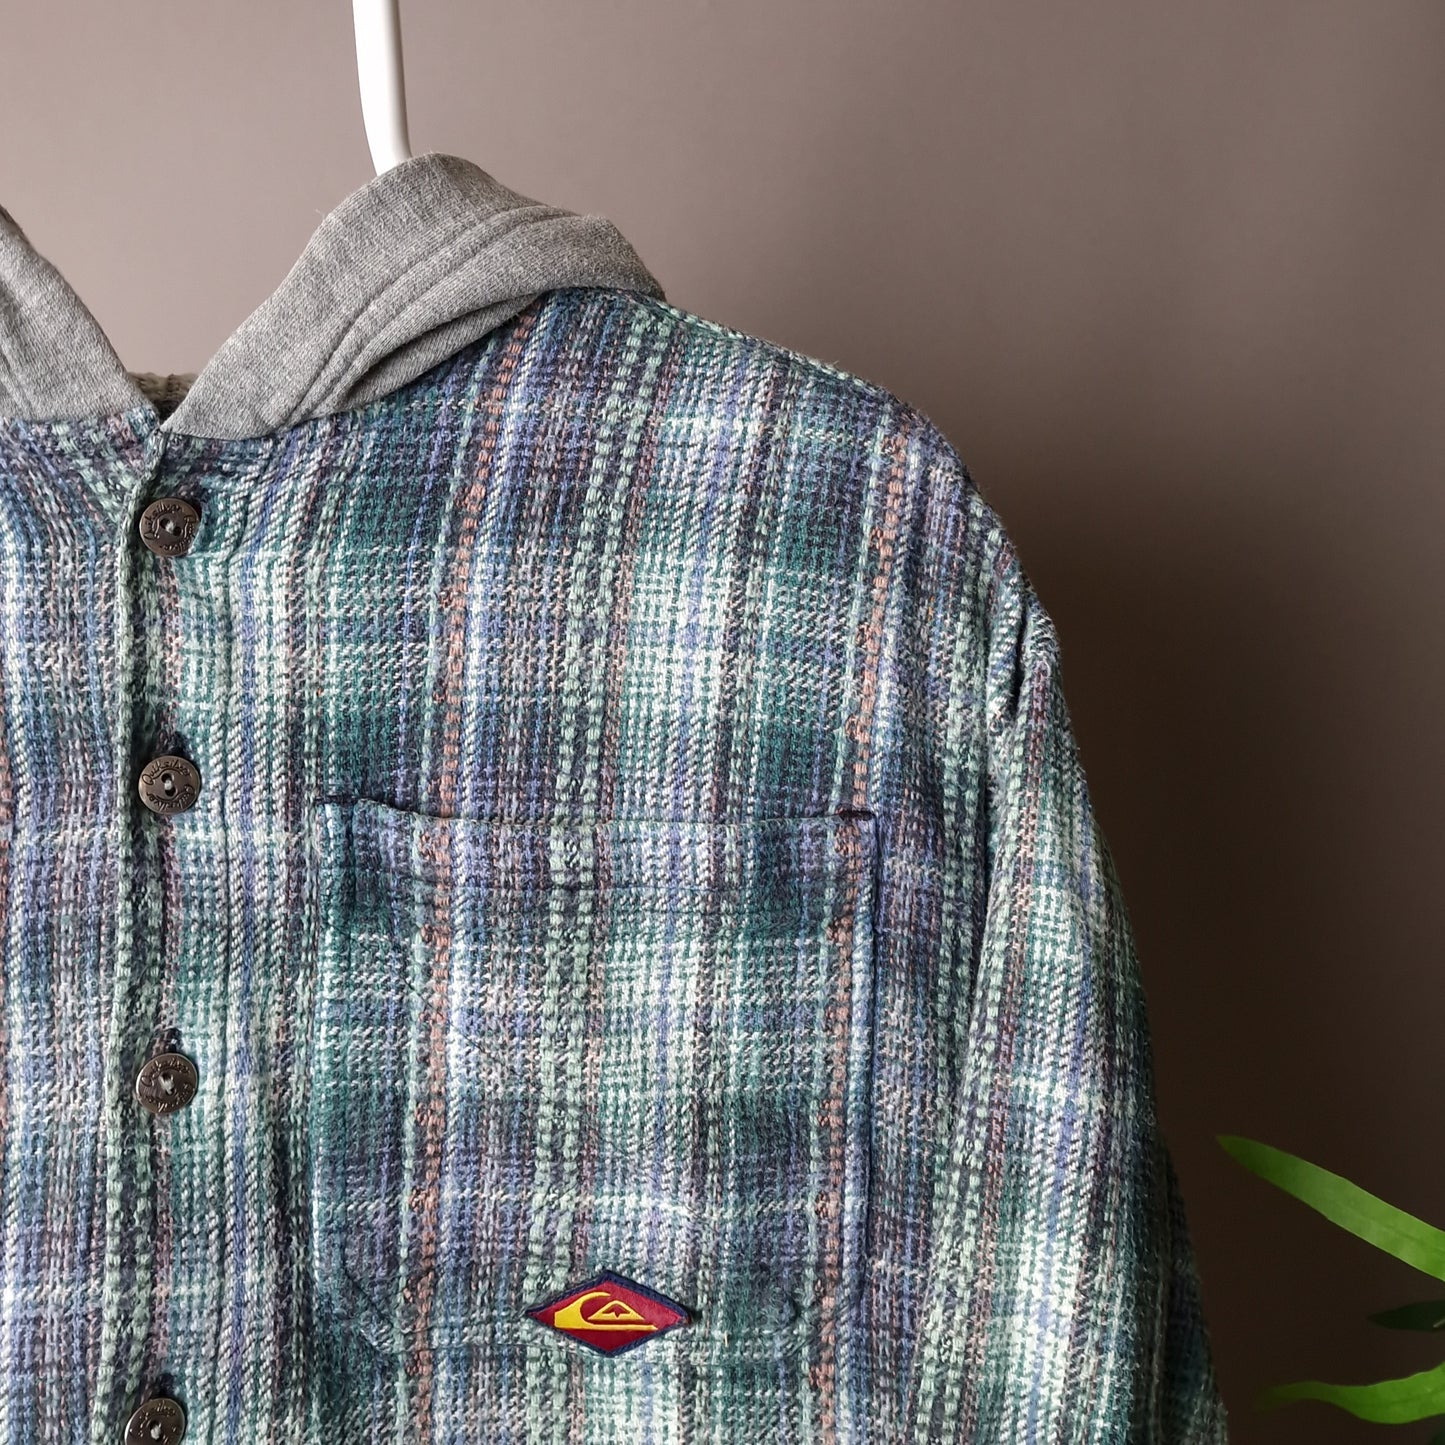 Vintage Quicksilver hooded shirt in green grey and blue - small